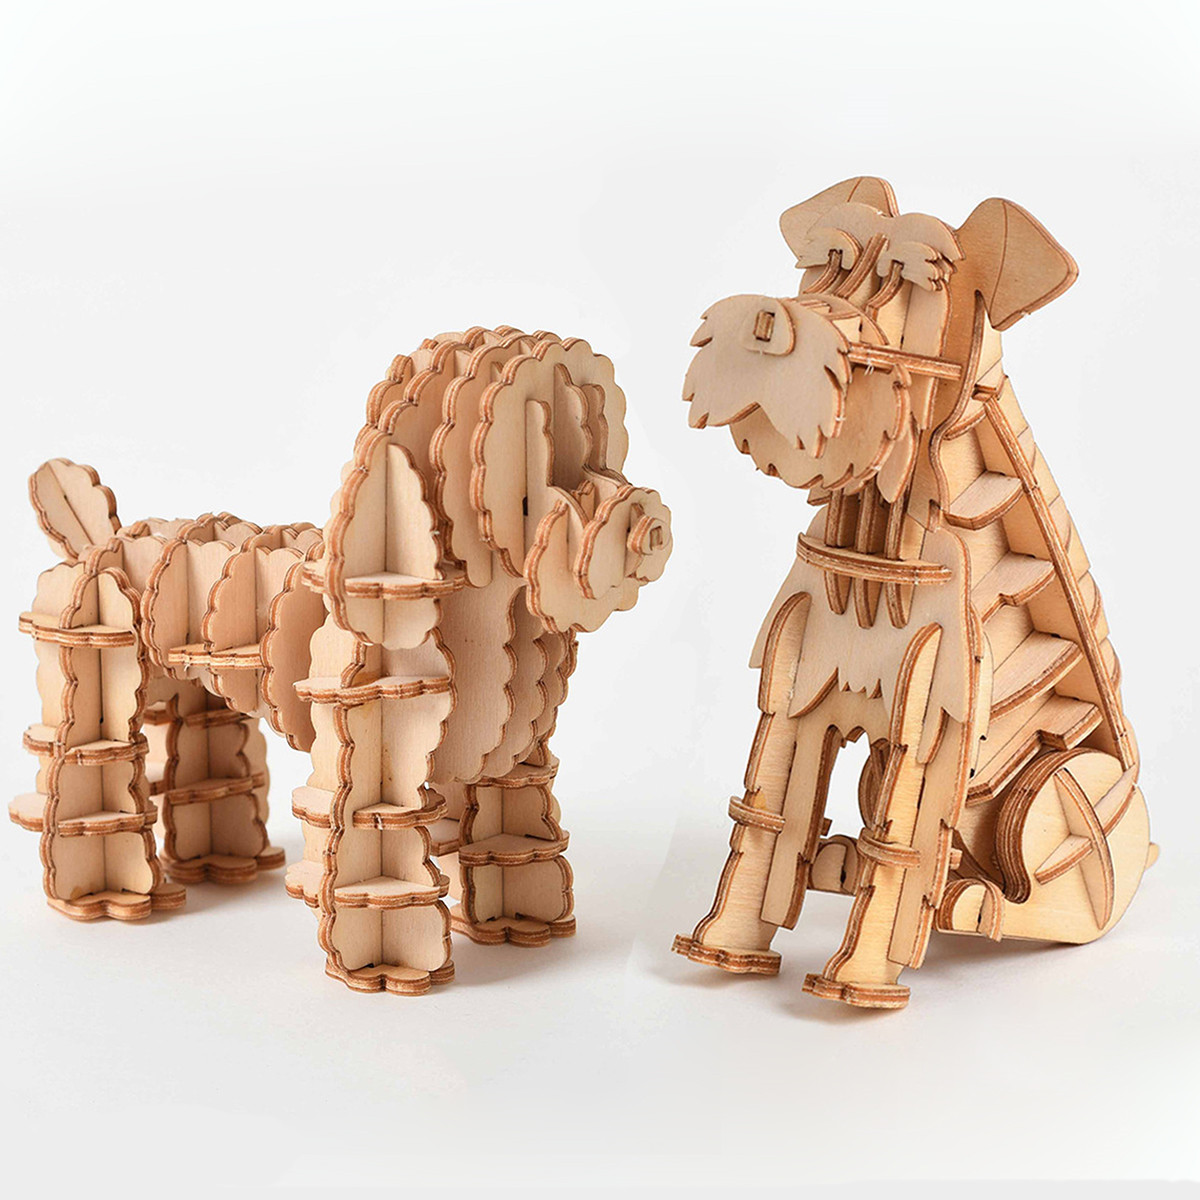 

3d Wooden Animal Puzzle Pet Dog Model Kits Wood Craft Brain Teaser Wood Gifts For Christmas